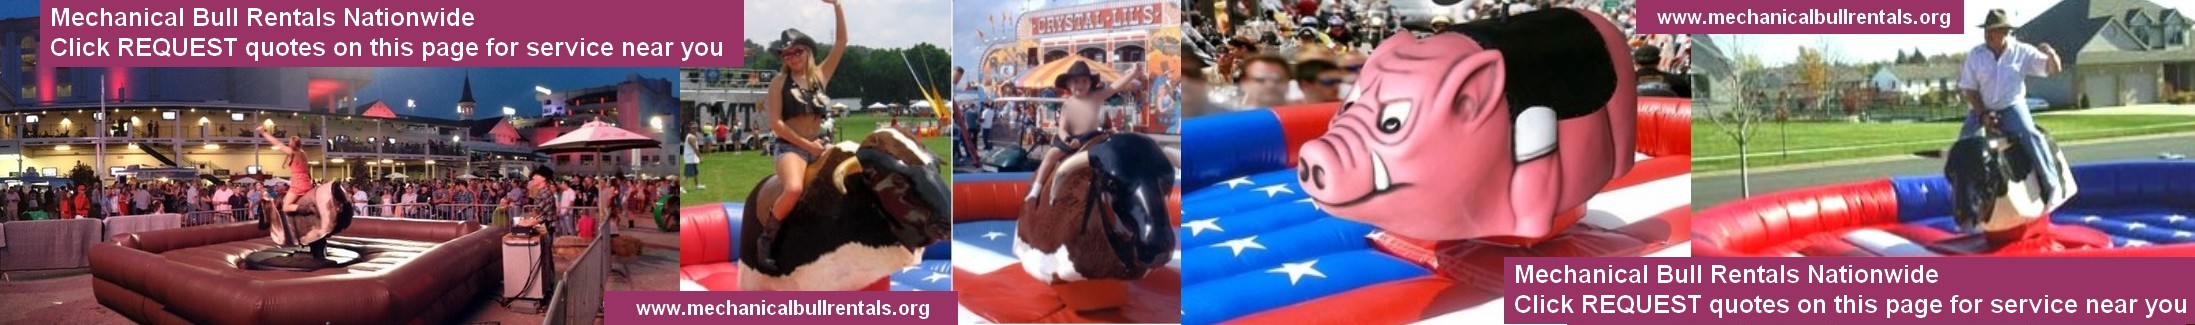 Mechanical Bull Rentals NY City New York NY and near you. Free referrals to local mechanical bull companies LOGO